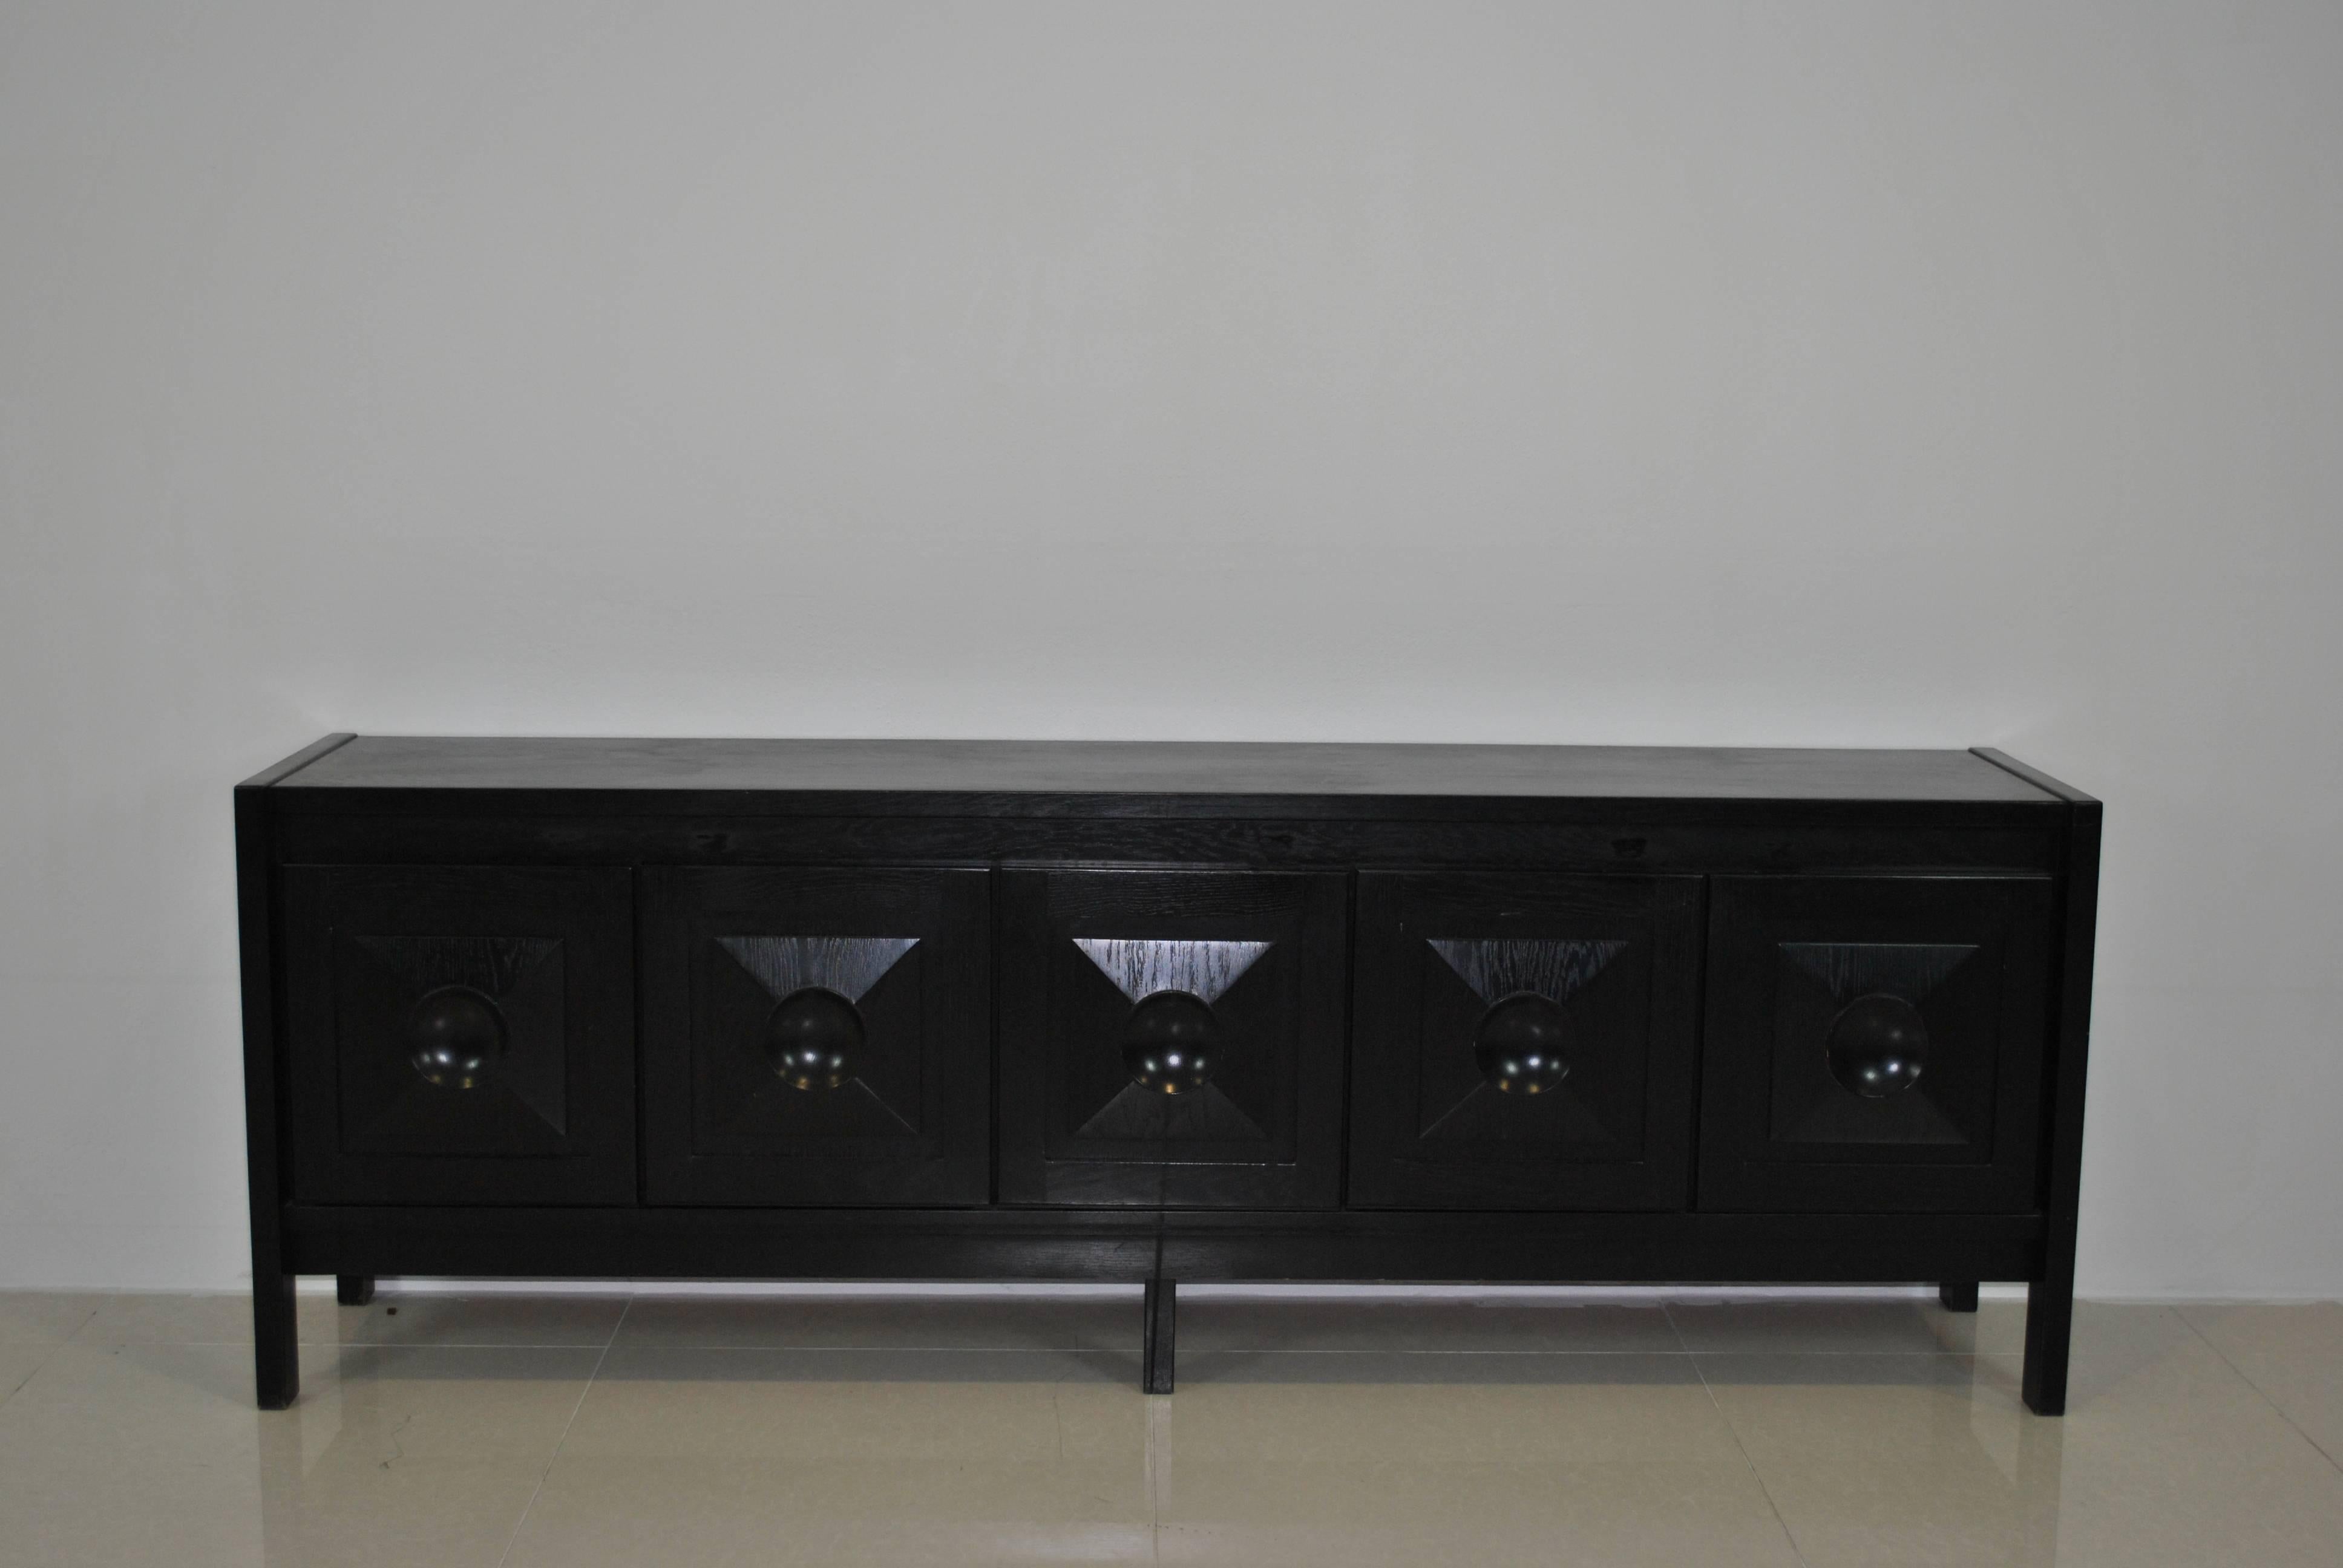 Elegant and large Belgian (Doors graphic sideboard, ebonized oak. Great match with pieces by Decoene, Emiel Veranneman or Alfred Hendrickx.

We also have a two-doors model and a high cabinet of this model listed. The last picture shows this